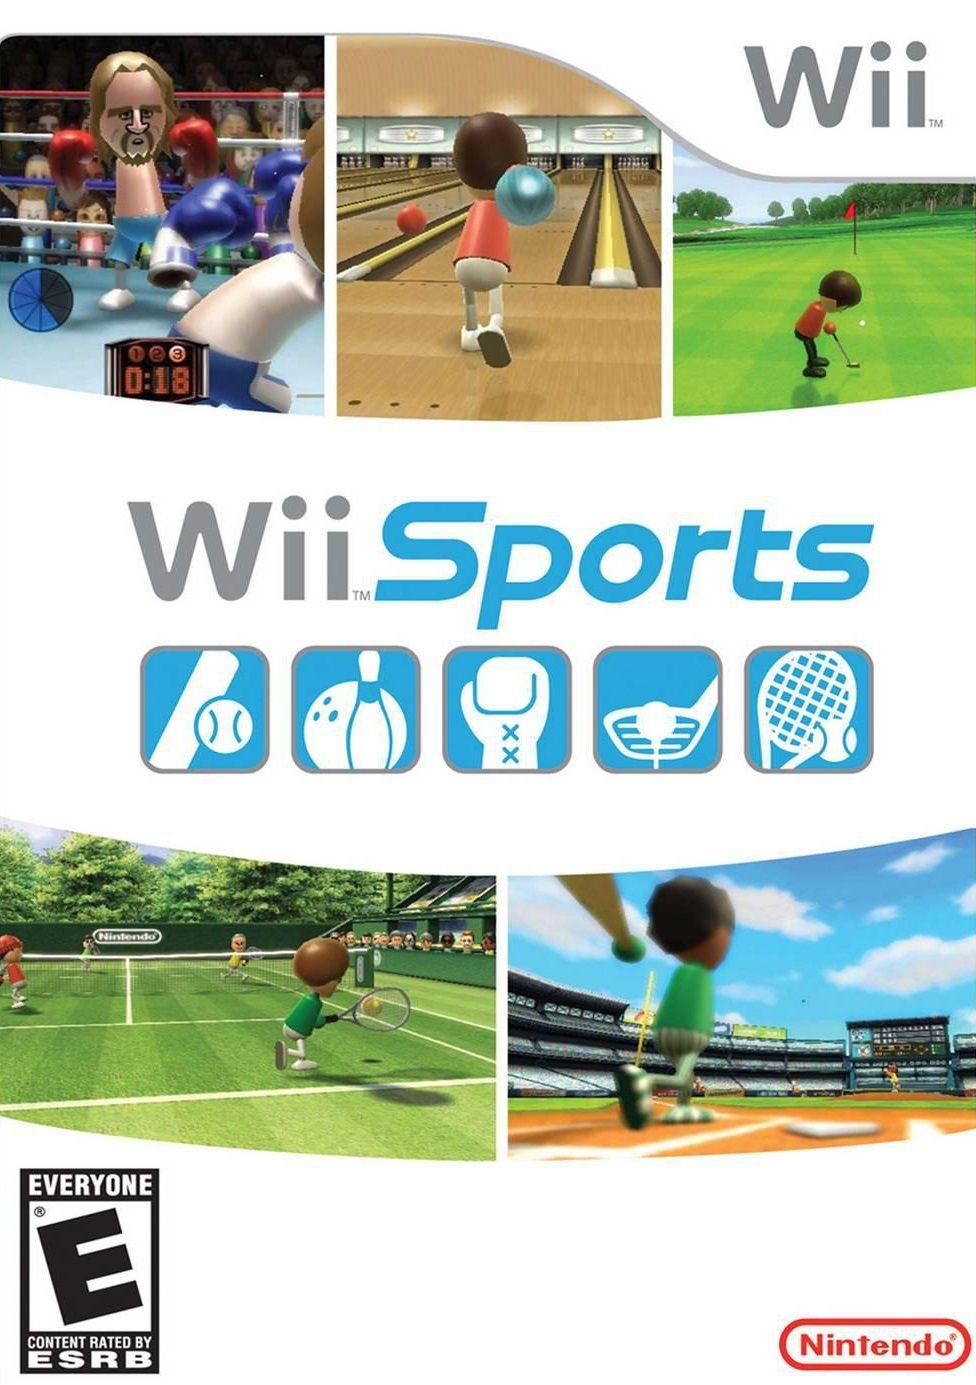 Wii Sports Nintendo WII Game. Exercise. Wii games, Wii